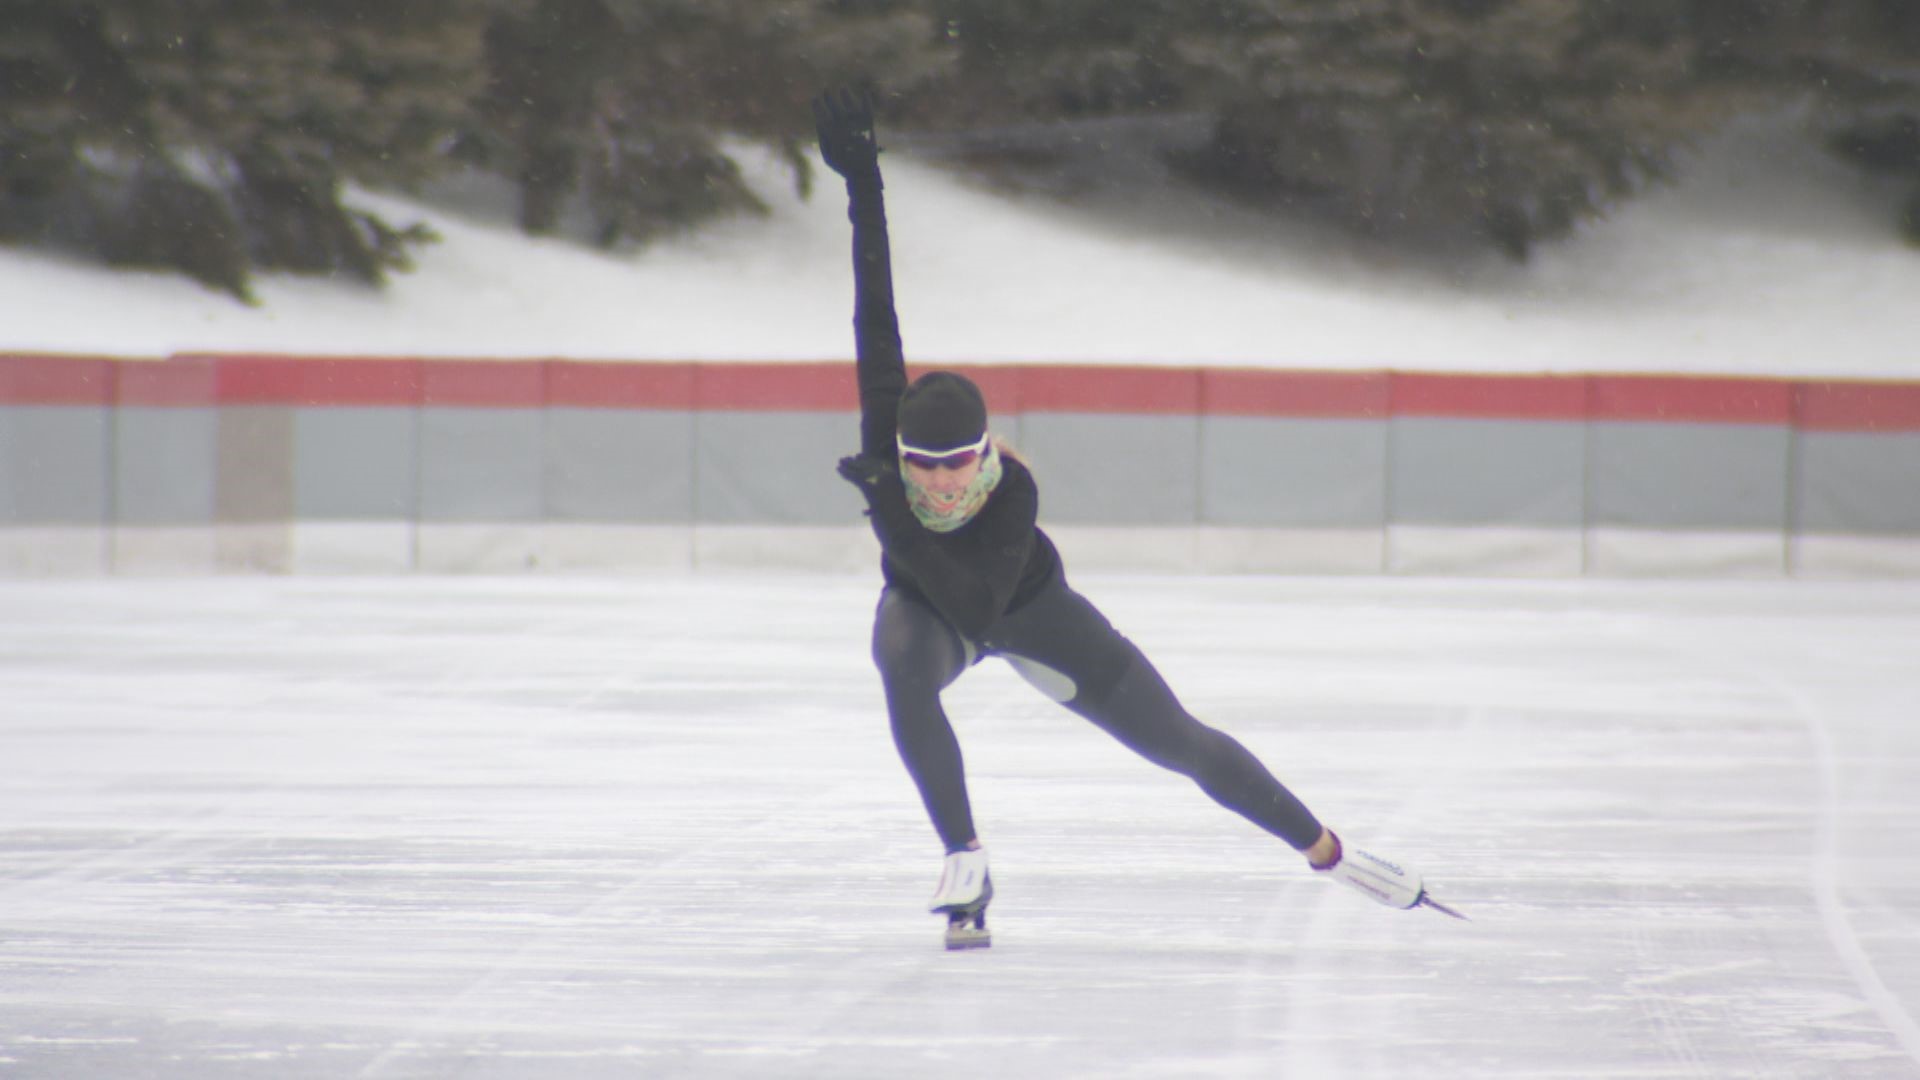 Greta Myers transitioned from hockey to long track speedskating and said she believes she can make the Winter Olympics in 2026 in Italy.